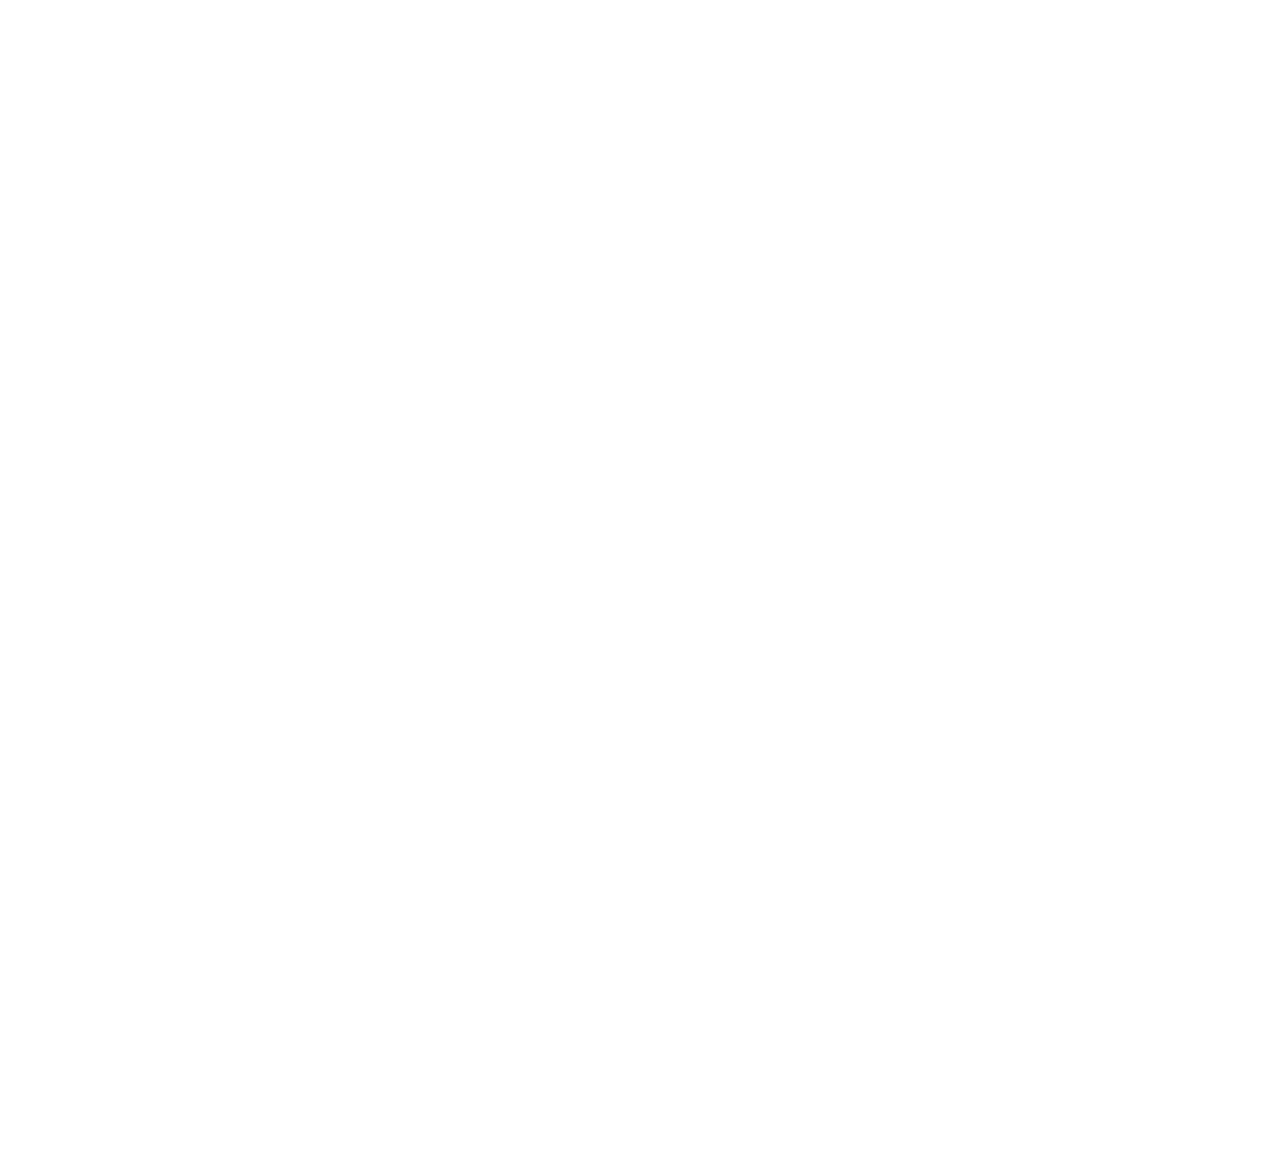 Burger and Beer Joint Logo - Food & Drink Menu | Revolutions | West Palm Beach, FL